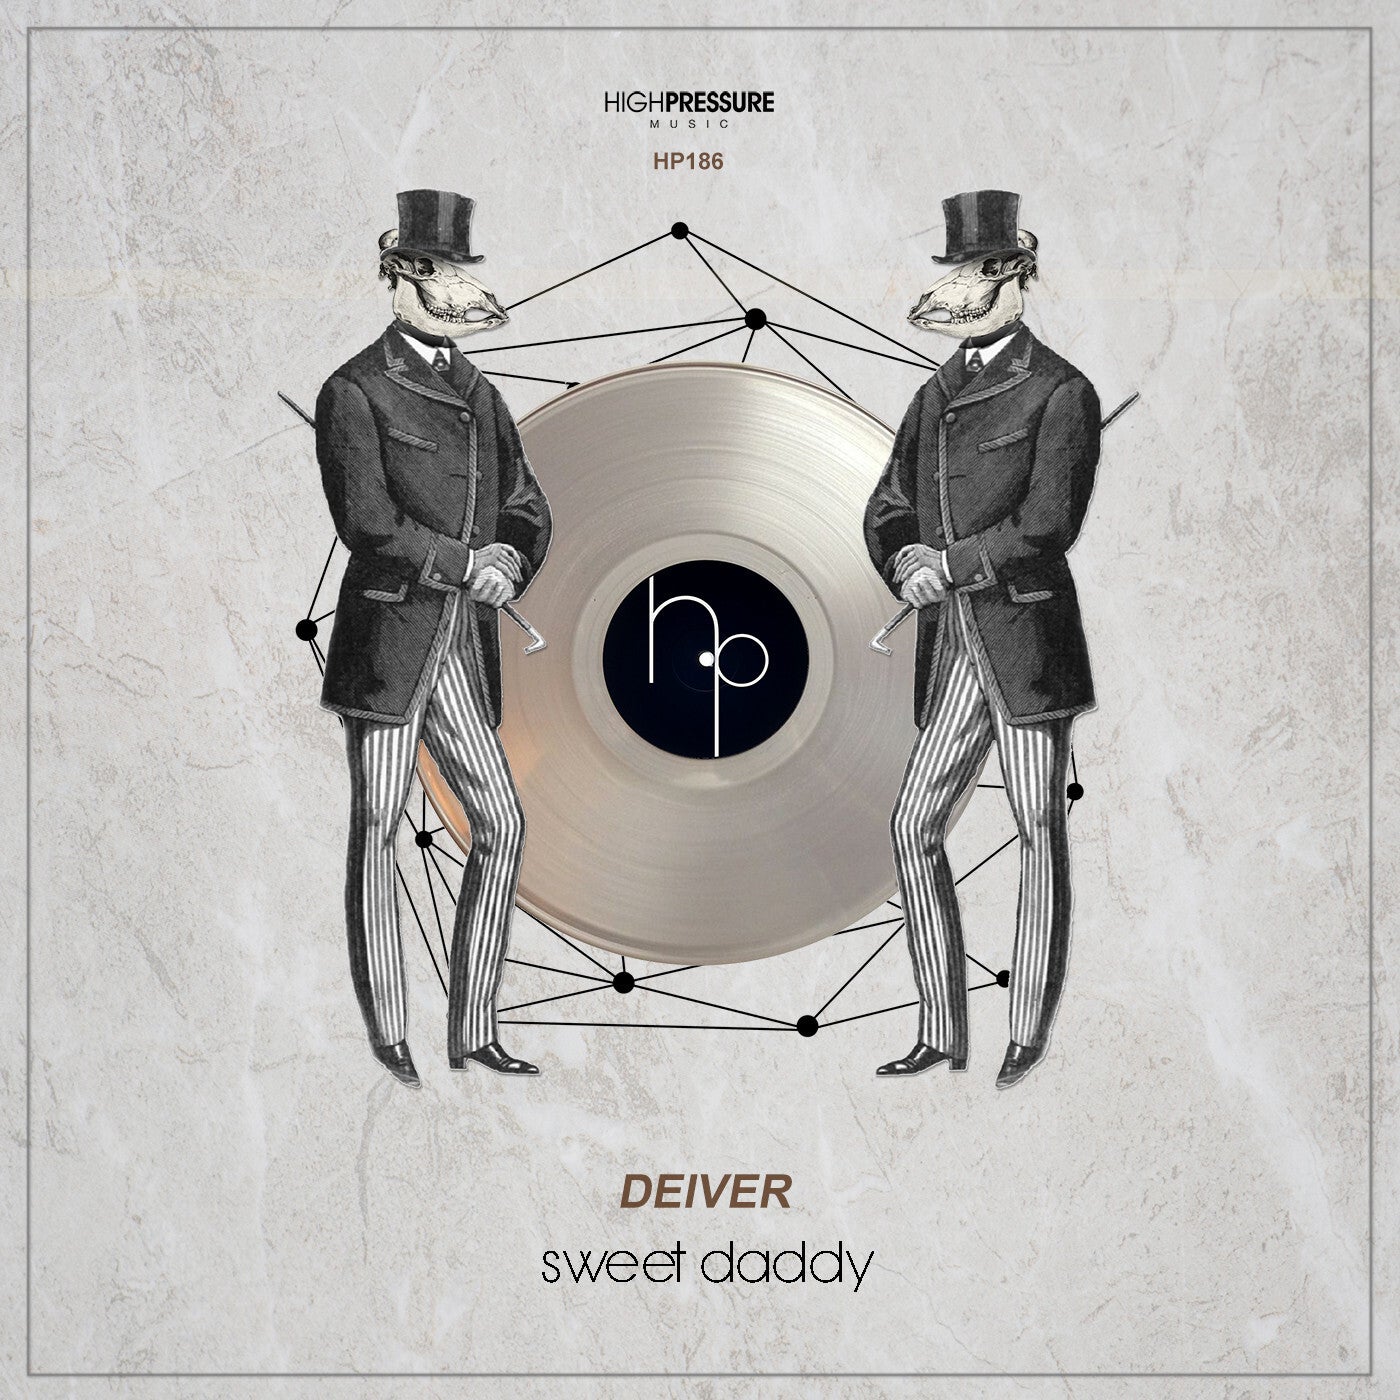 Deiver – Sweet Daddy [HP186]